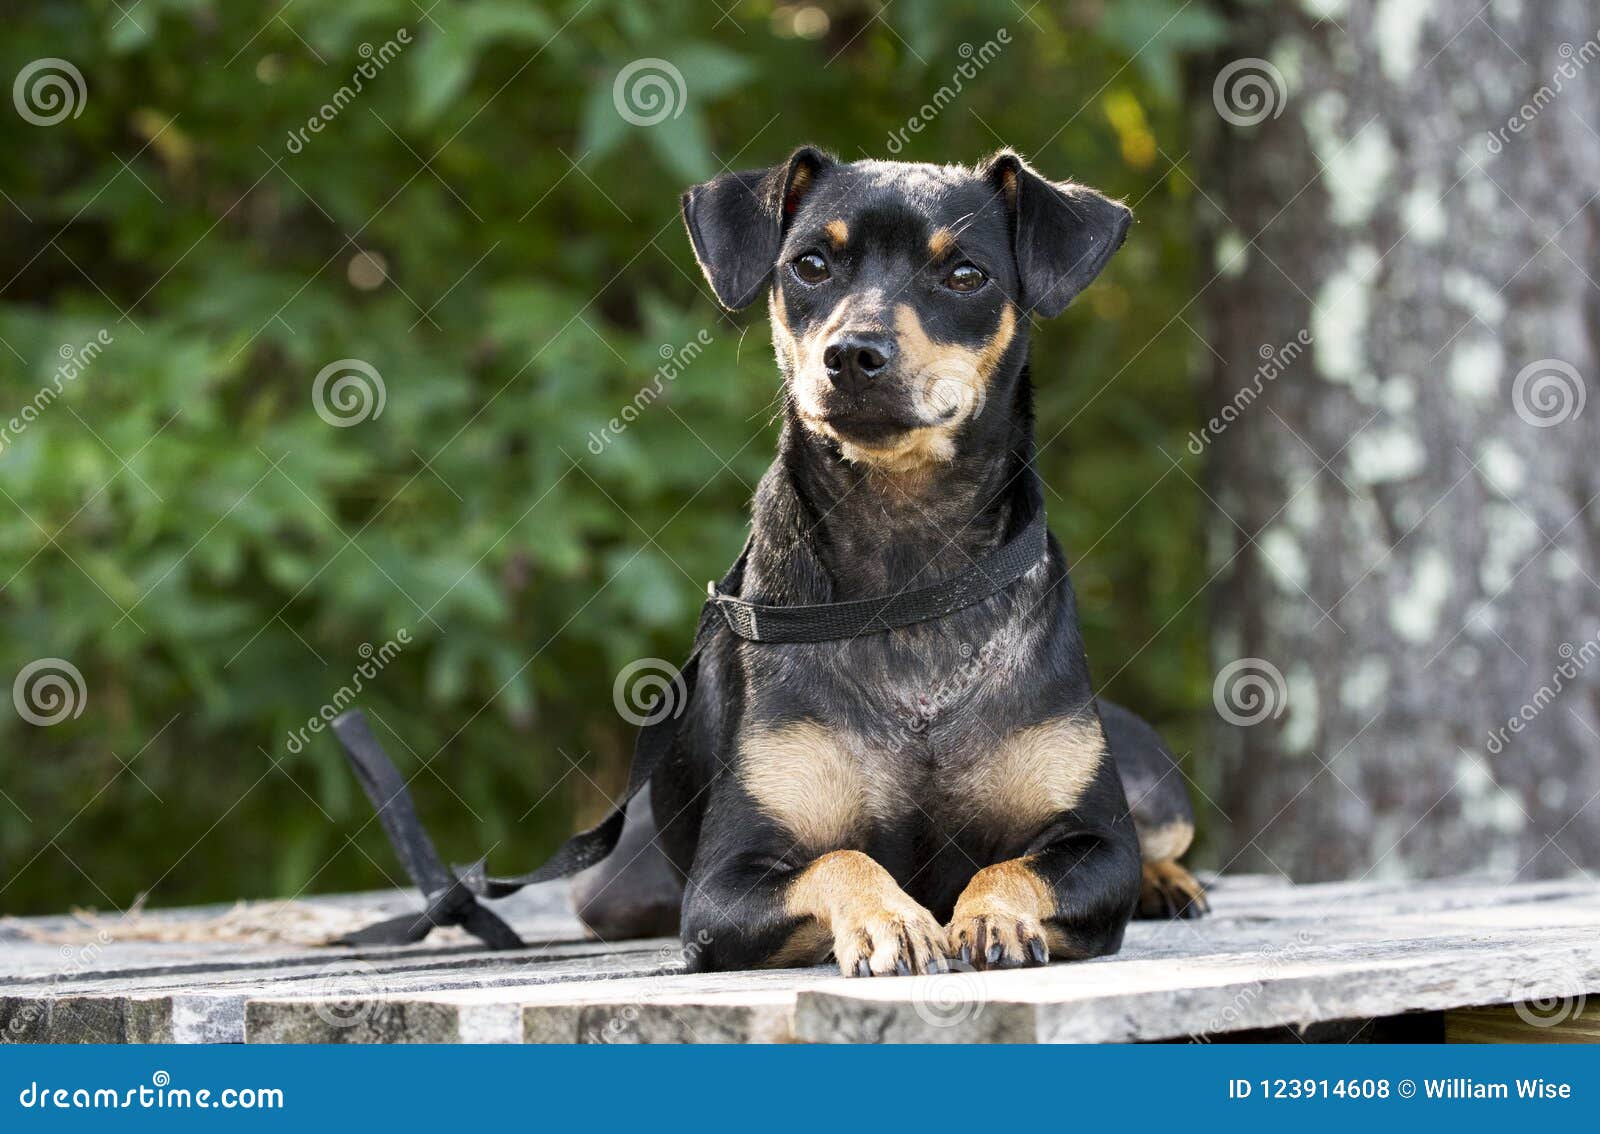 Miniature Pinscher Manchester Terrier Mixed Breed Dog Adoption Photo Stock Photo Image Of Mixed Breed 123914608